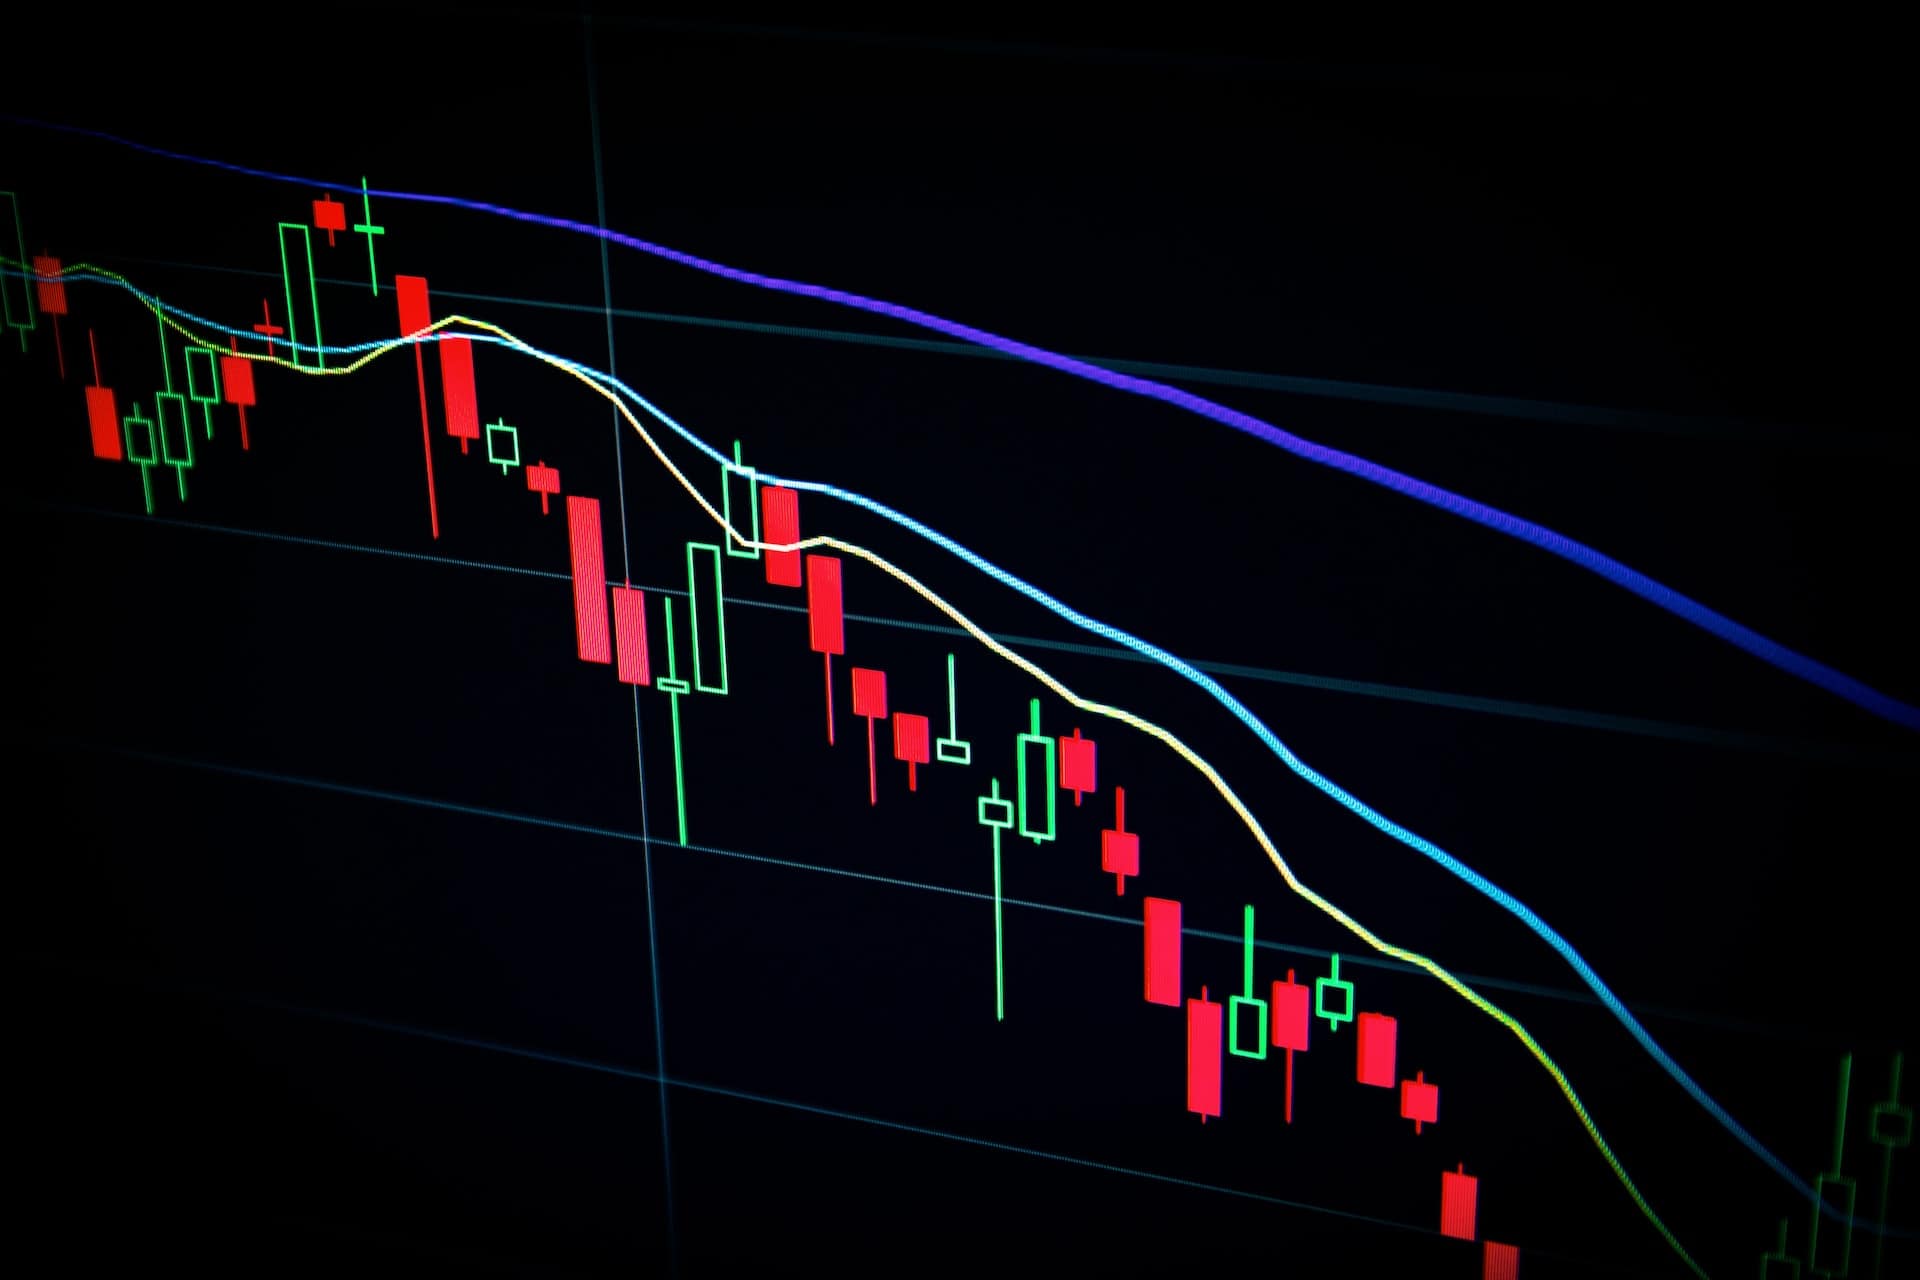 TRON's USDD Stablecoin Dips Lower Despite Drop In Withdrawals